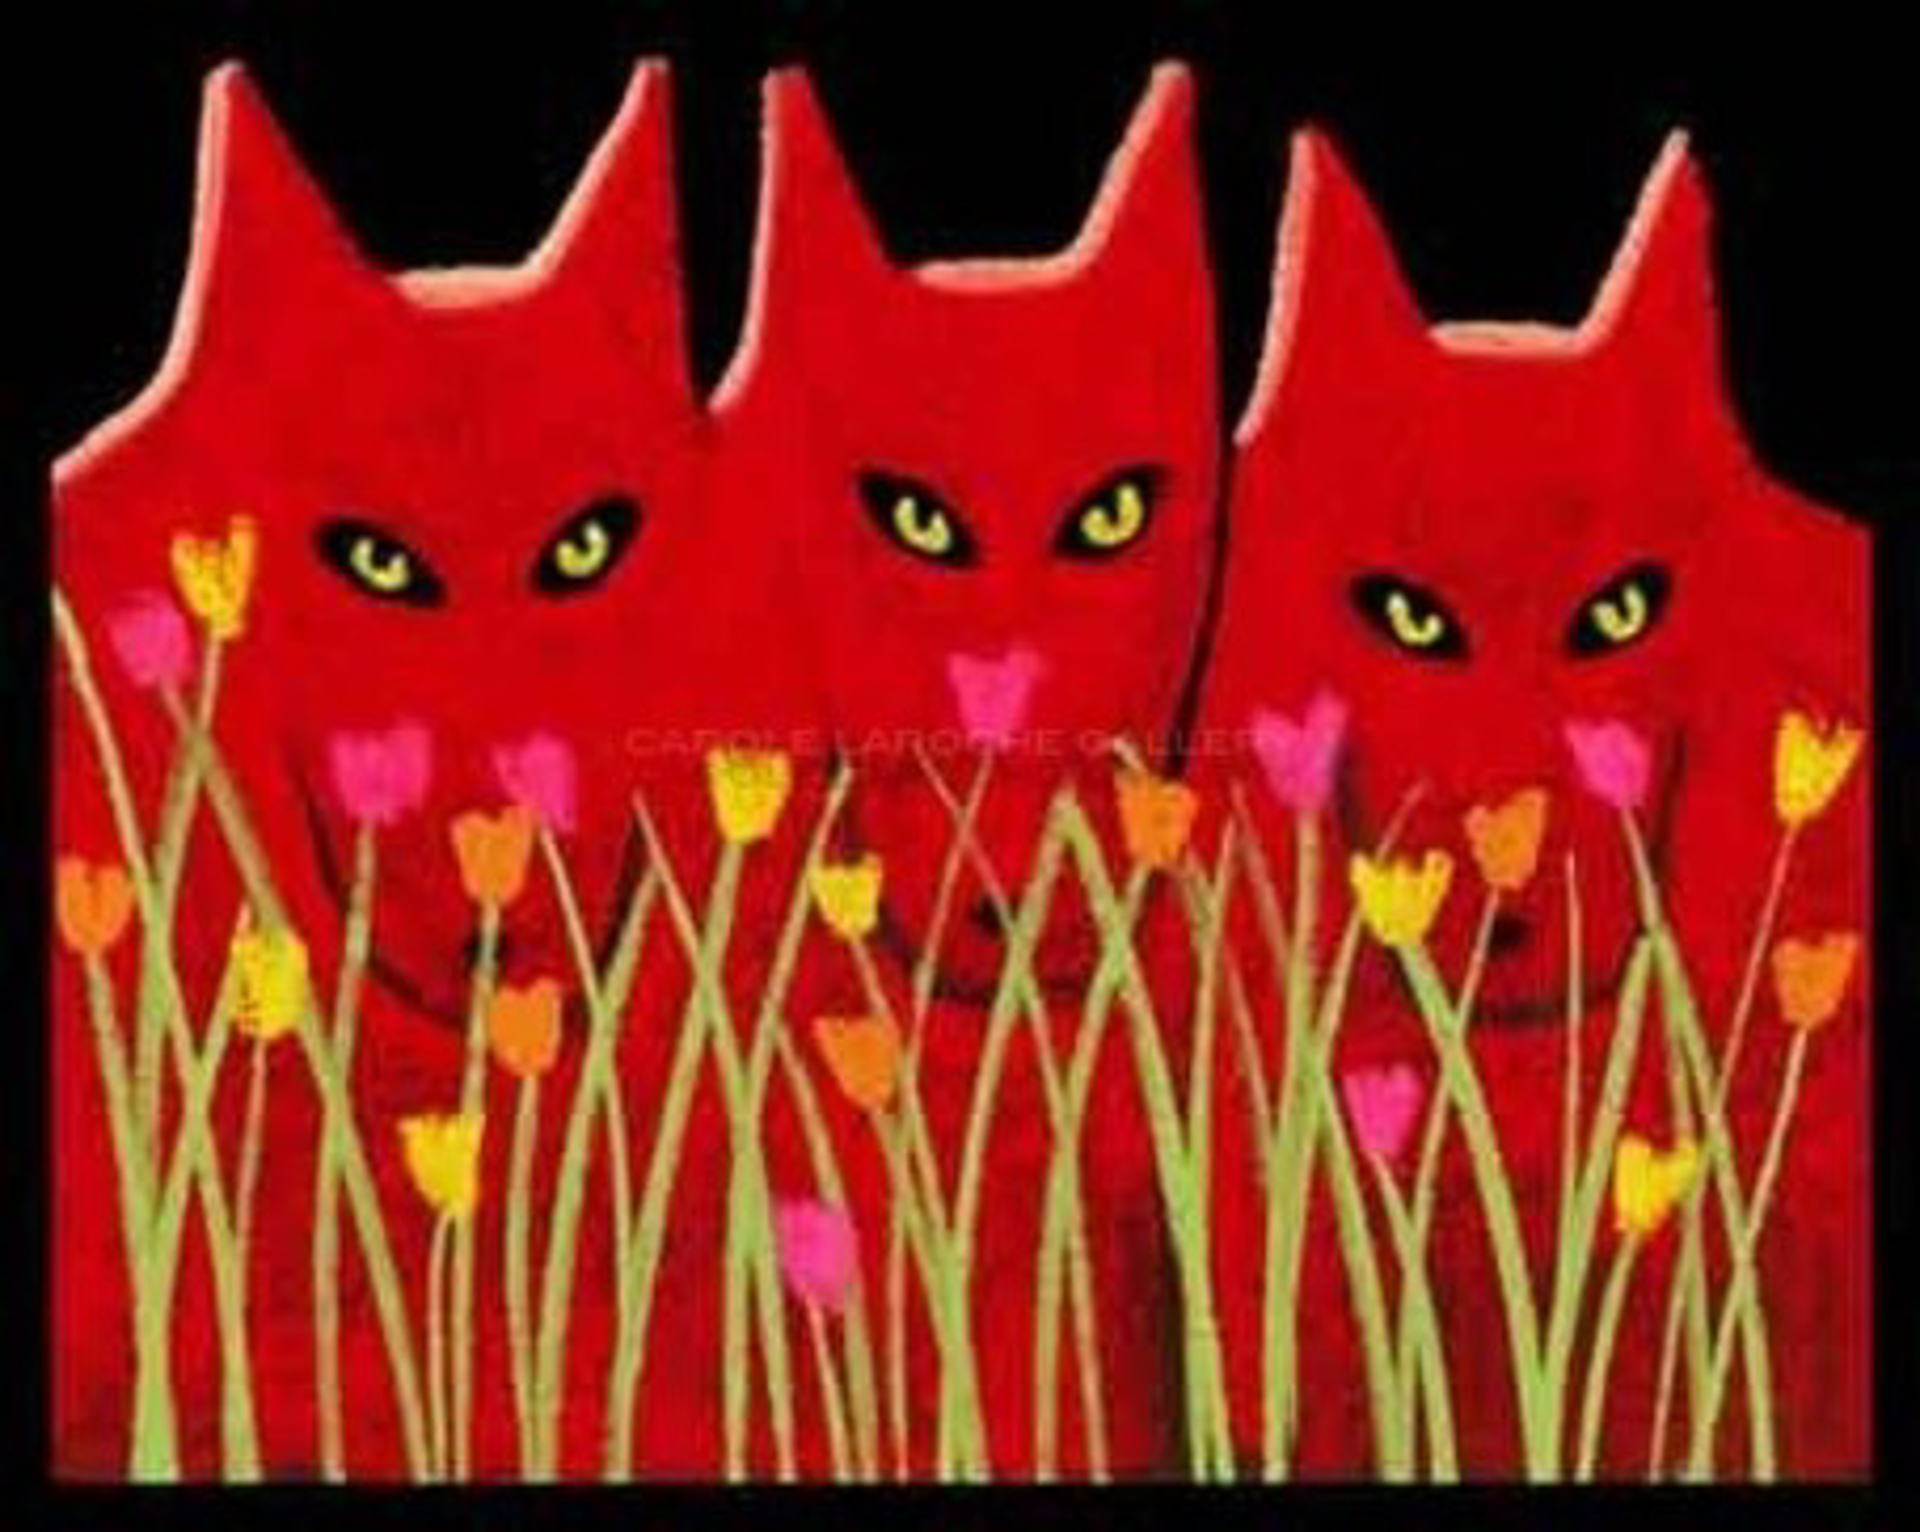 THREE RED WOLVES AND WILDFLOWERS - limited edition giclee on paper w/frame size of 23"x27" by Carole LaRoche